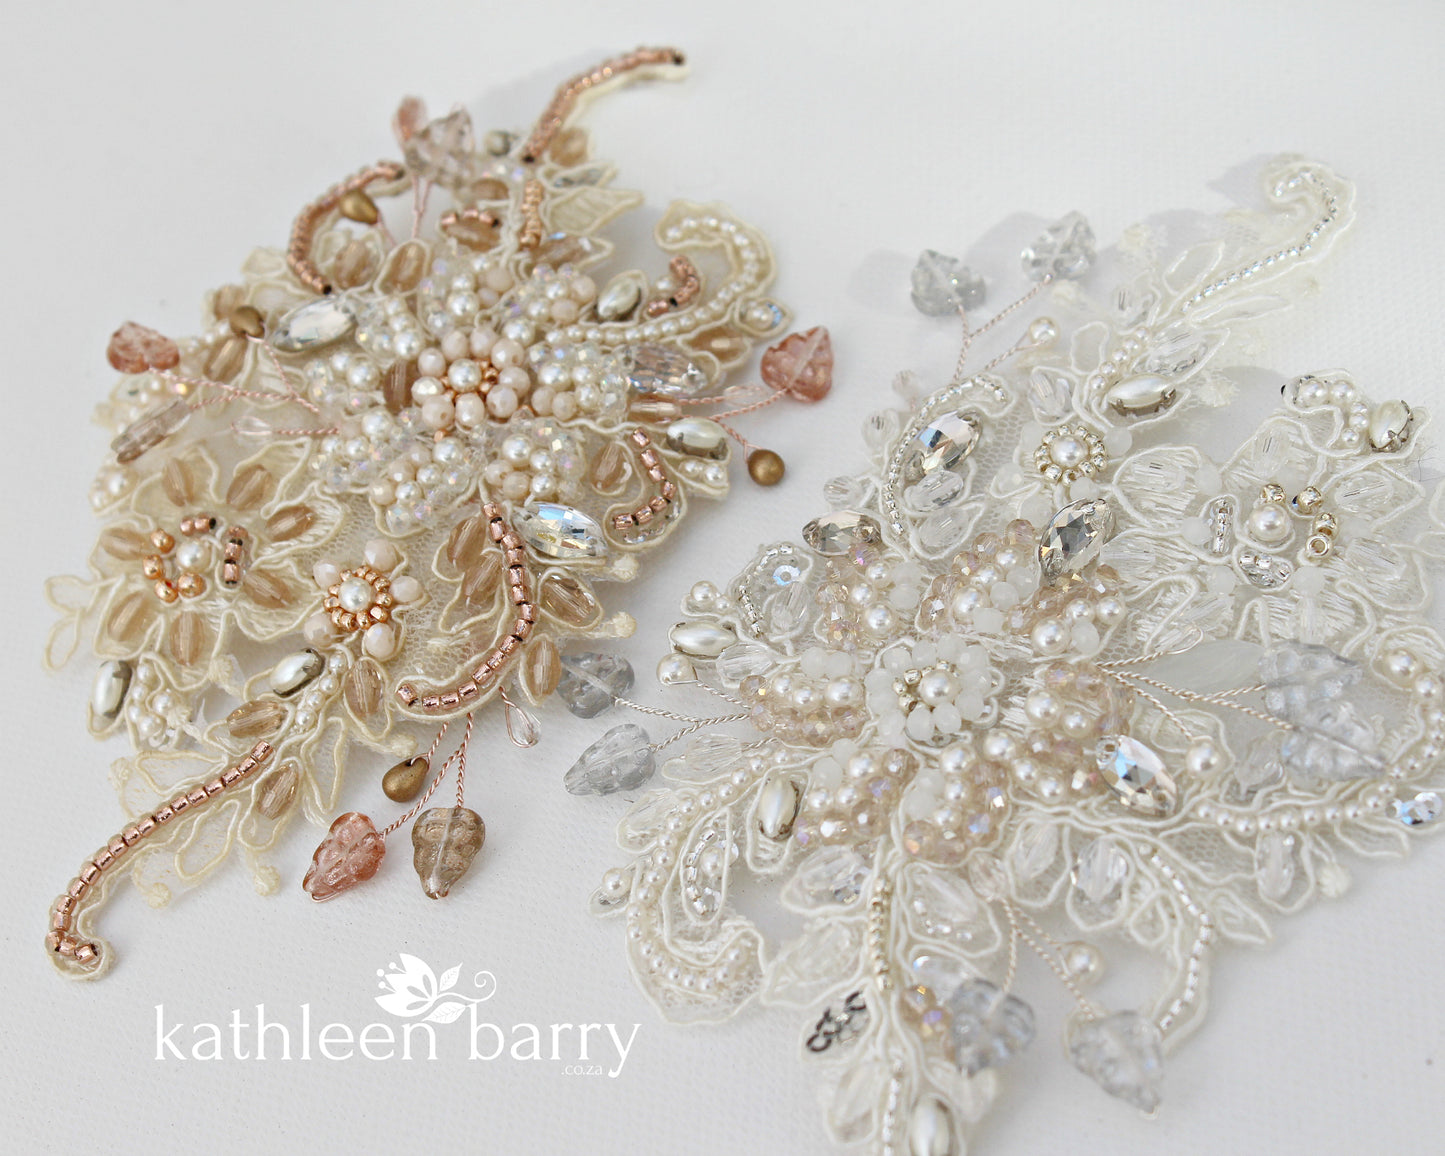 Elsibe lace hairpiece - veil accessory Rose gold or silver, Crystal, pearl in ivory champagne tones